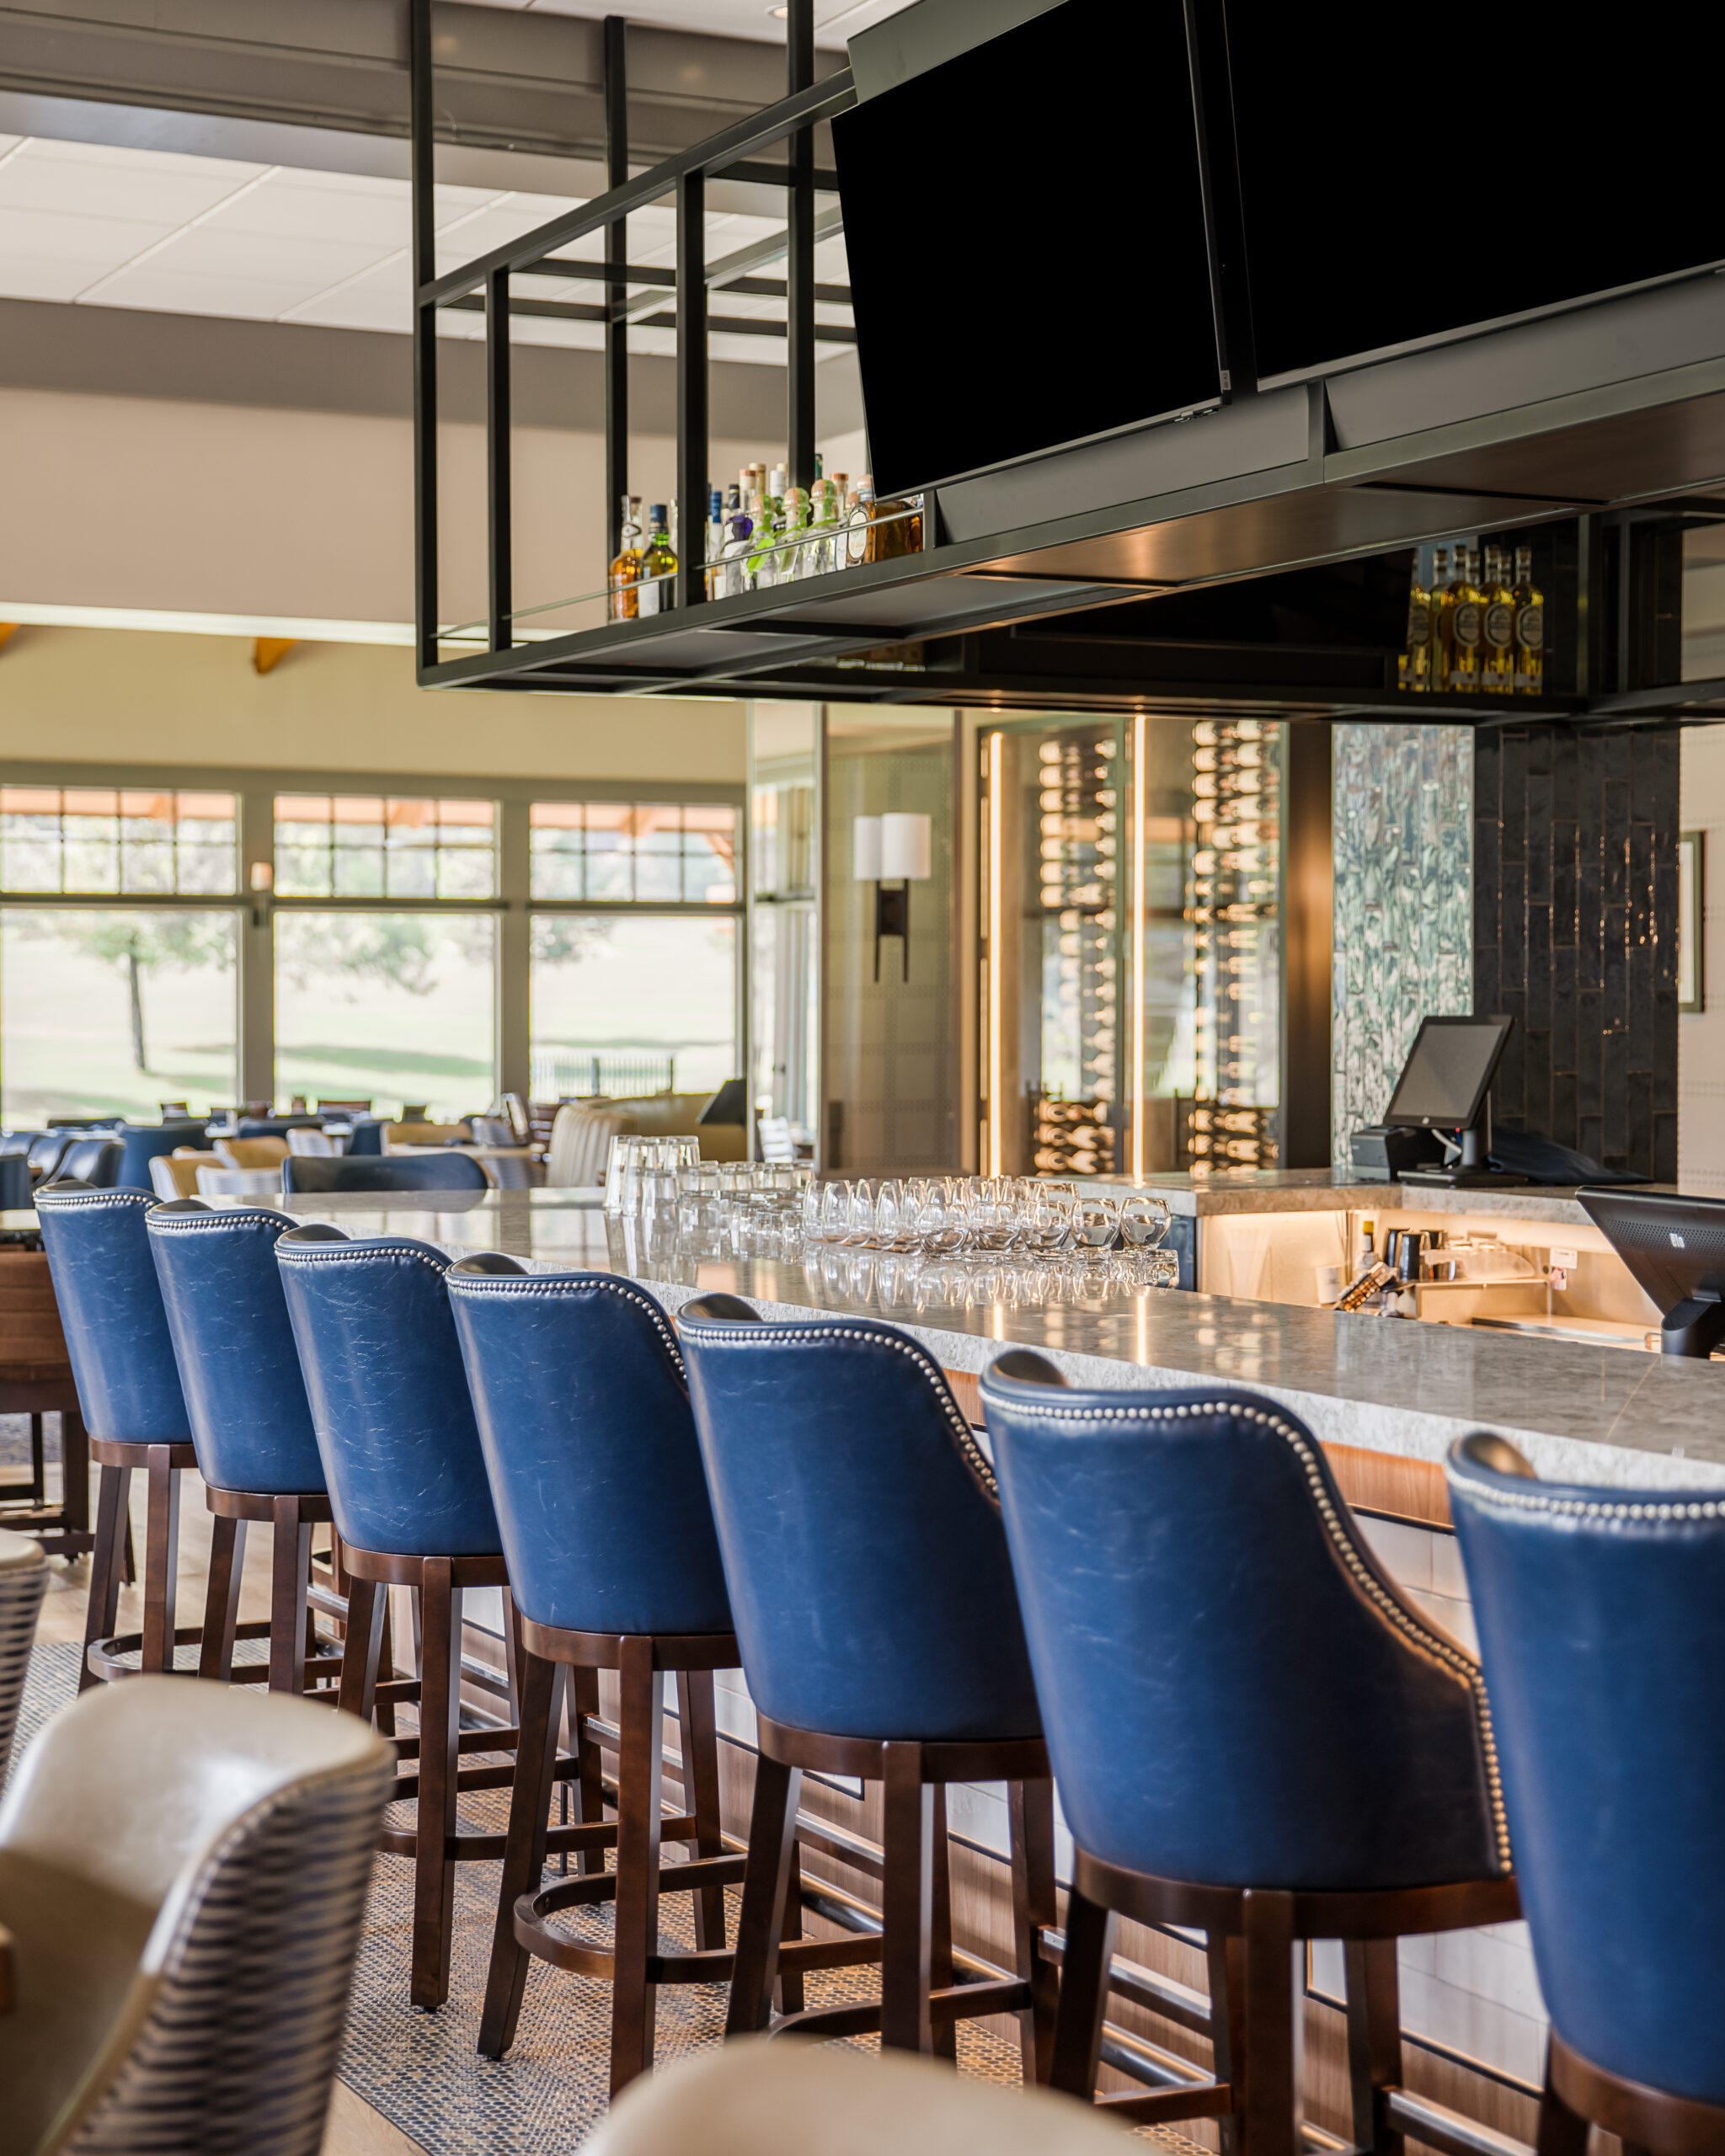 Upscale country club bar and restaurant interior design, blue chair seating, black shelves, glasswear